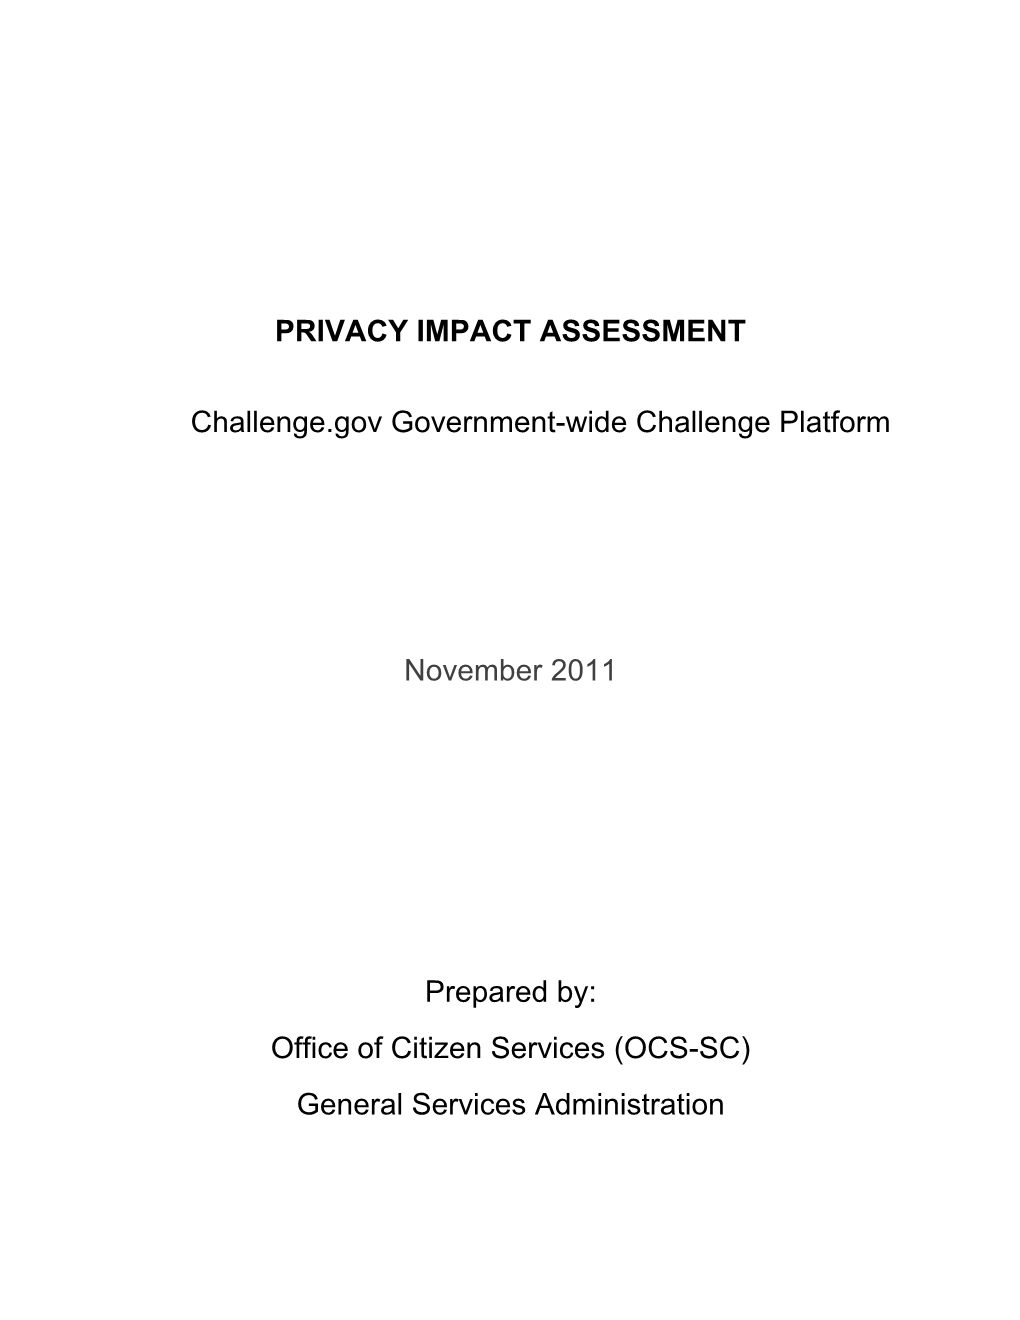 Privacy Impact Assessment s1